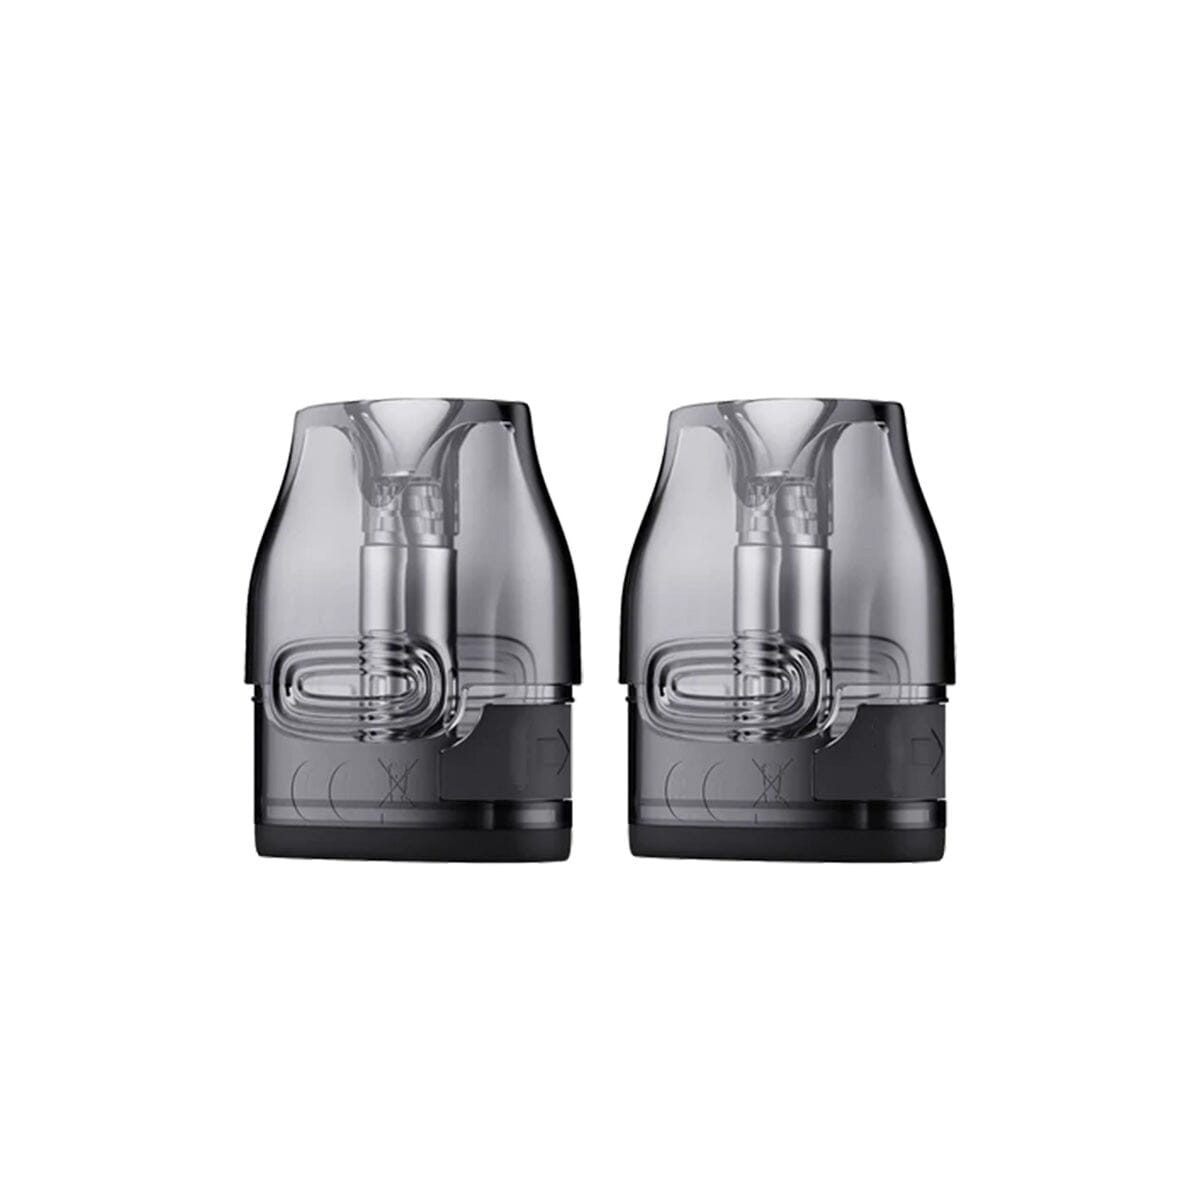 VooPoo Vmate Vape Replacement Pods Replacement Pod VooPoo 